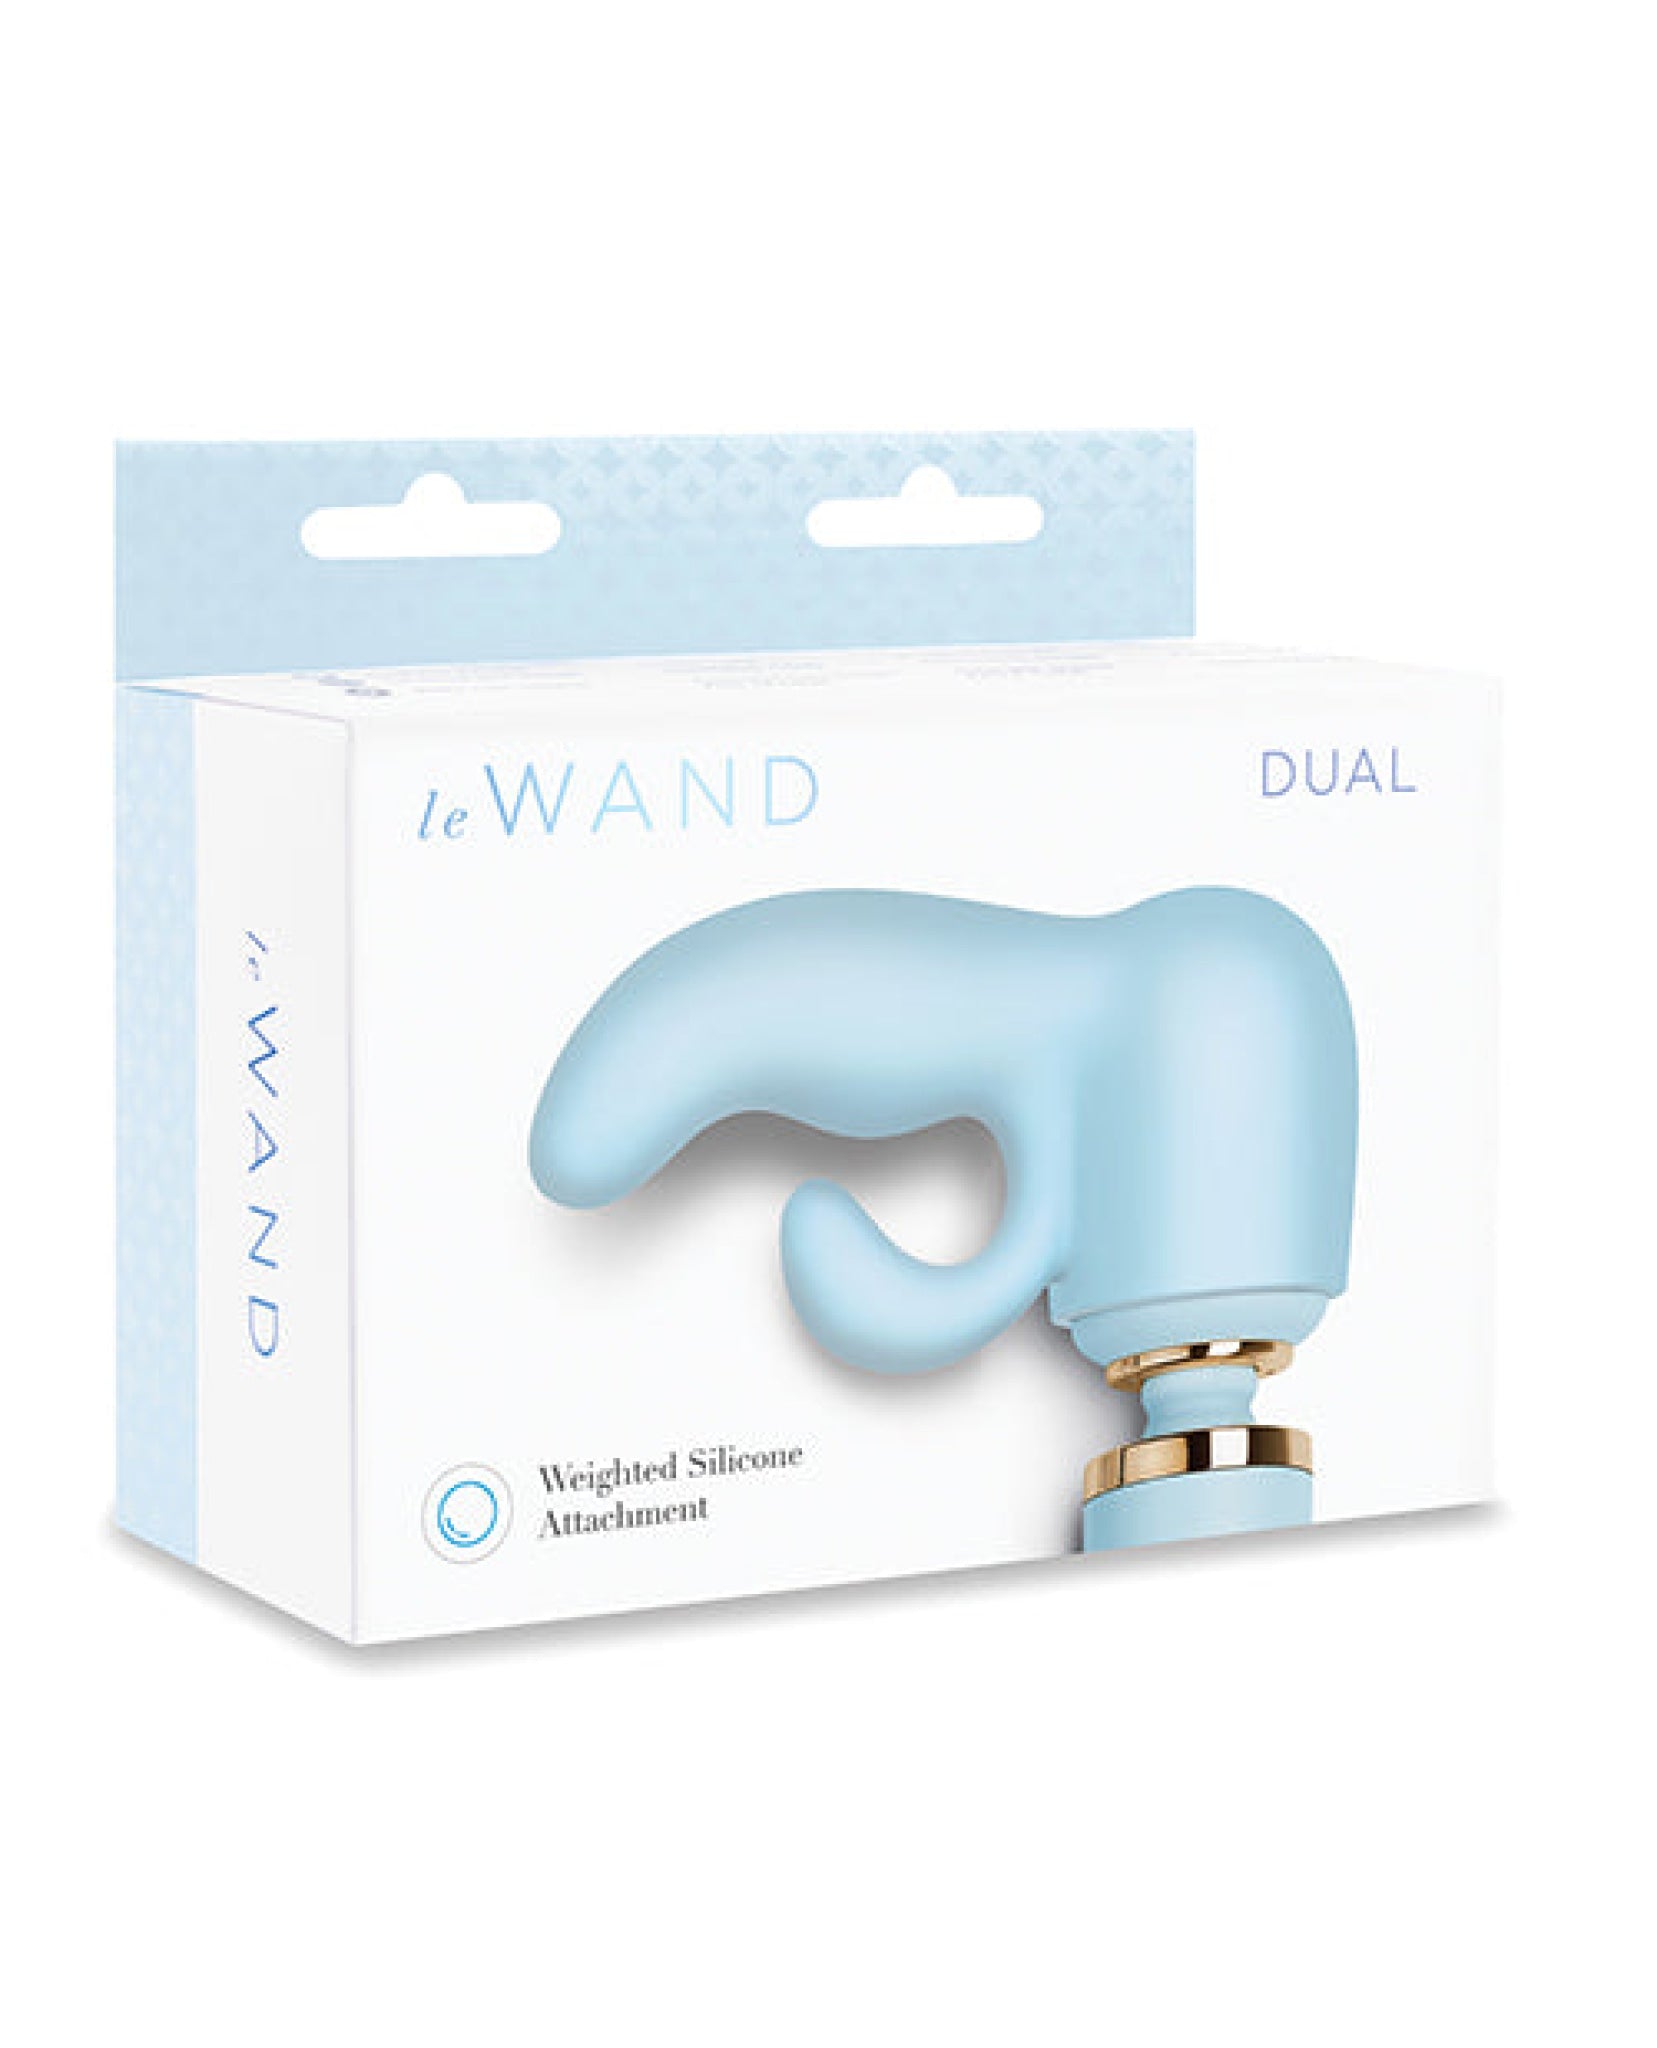 Le Wand Dual Weighted Silicone Attachment Le Wand